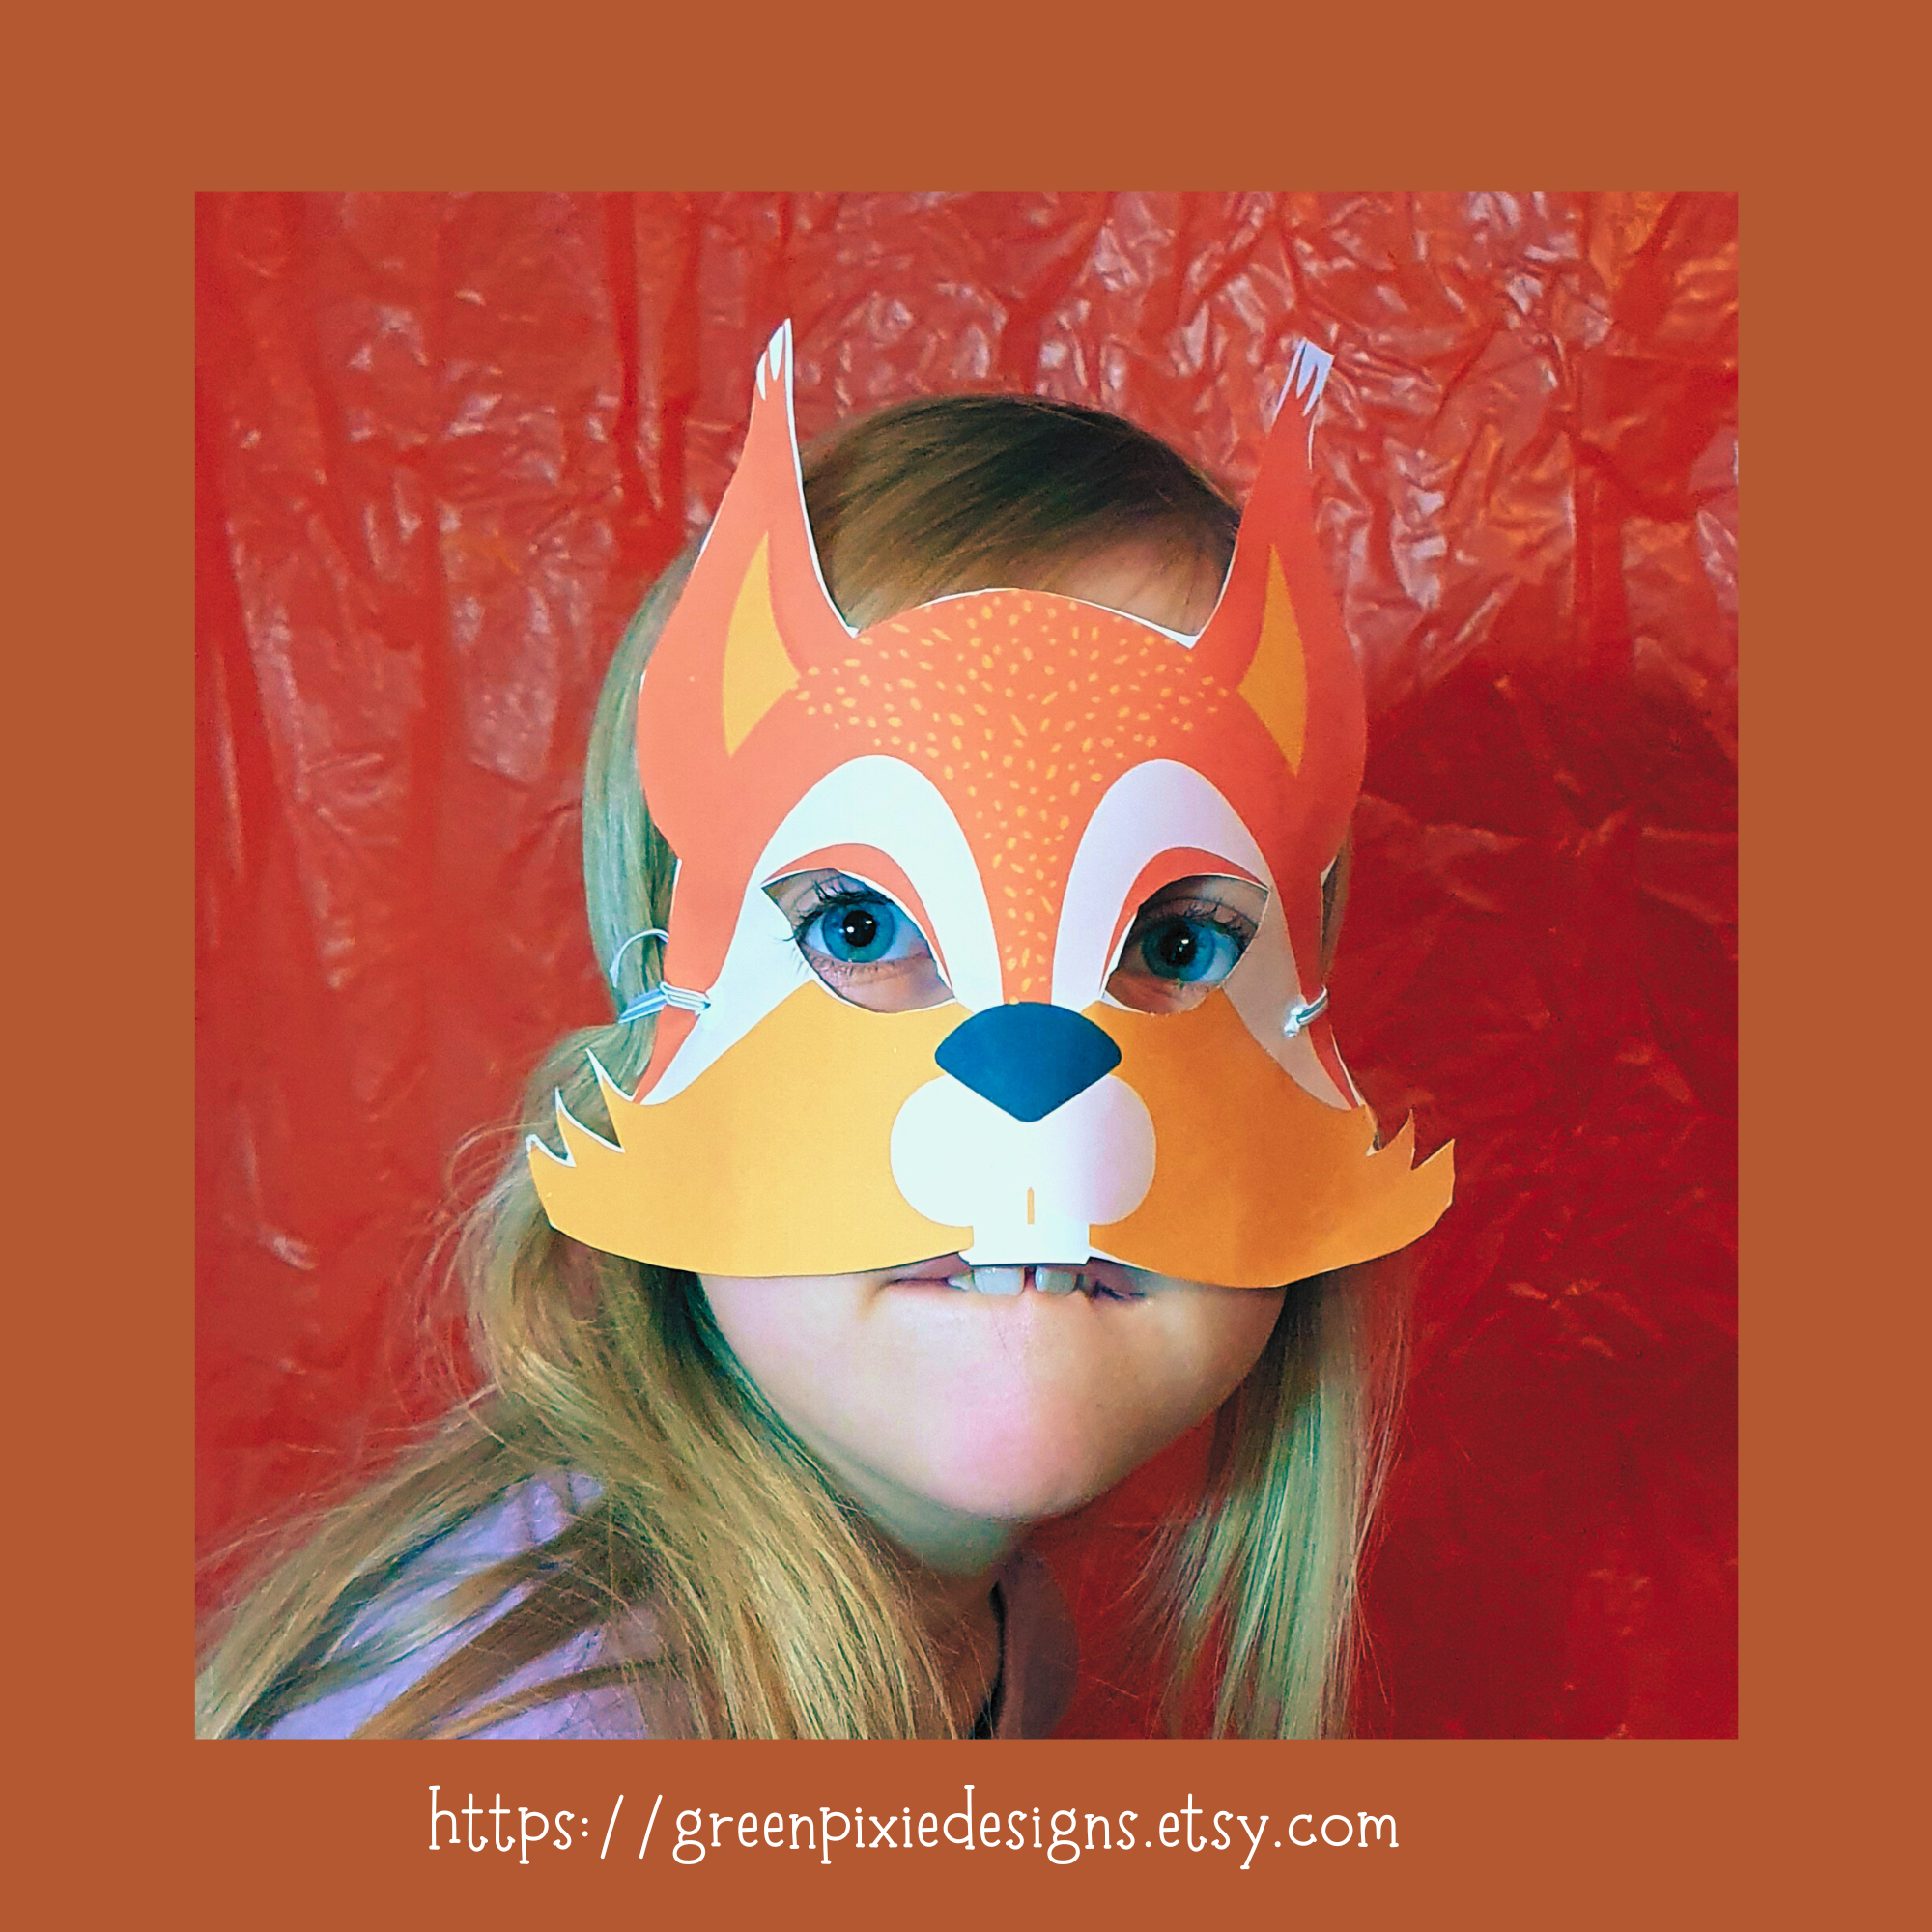 Learn to make a DIY woodland squirrel kids mask